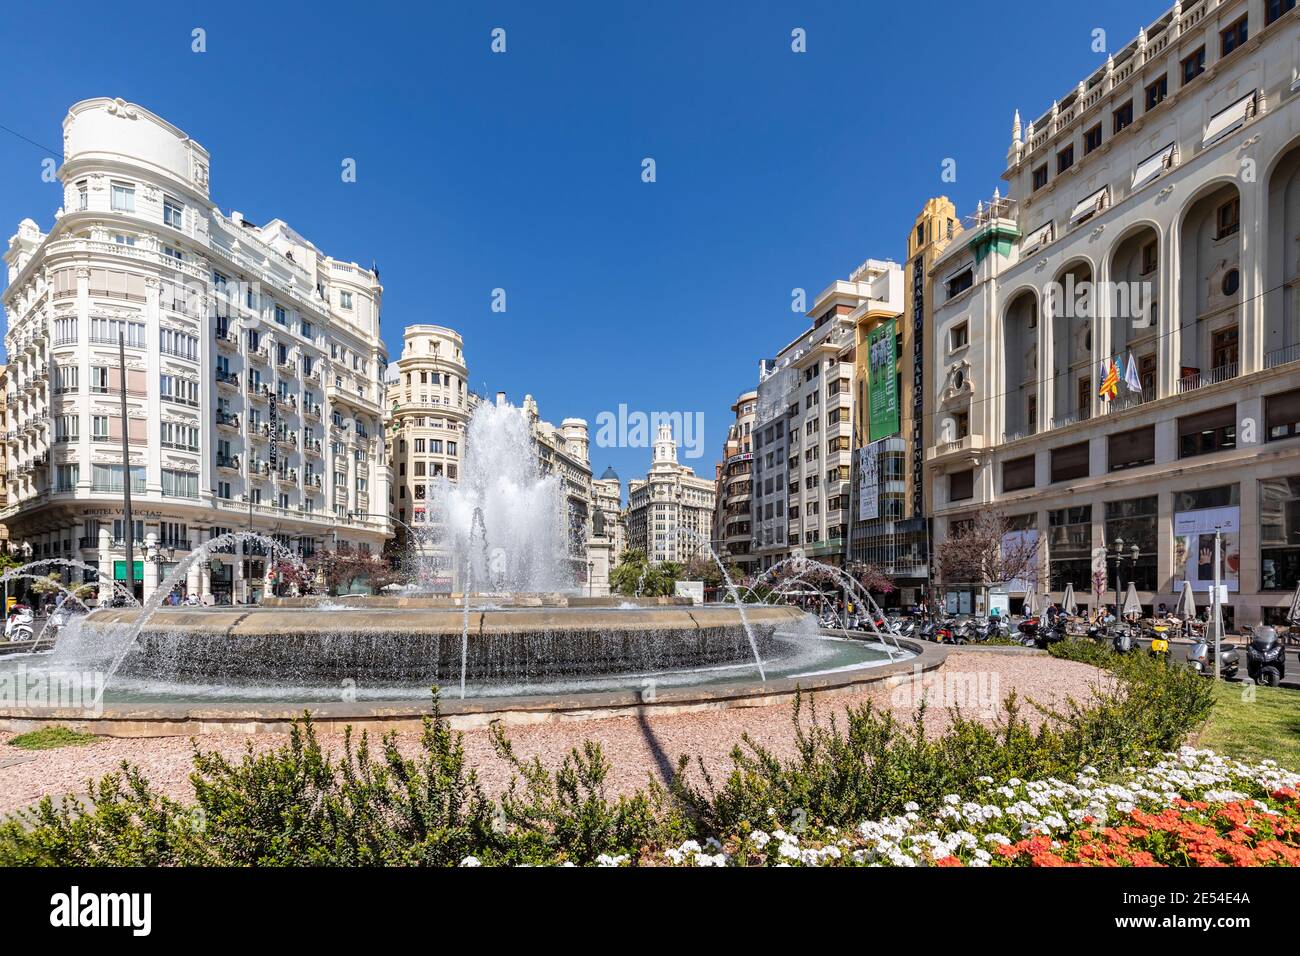 Facades Of Townhouses In Valencia With A Fountain In The Foreground, Spain, Europe Stock Photo